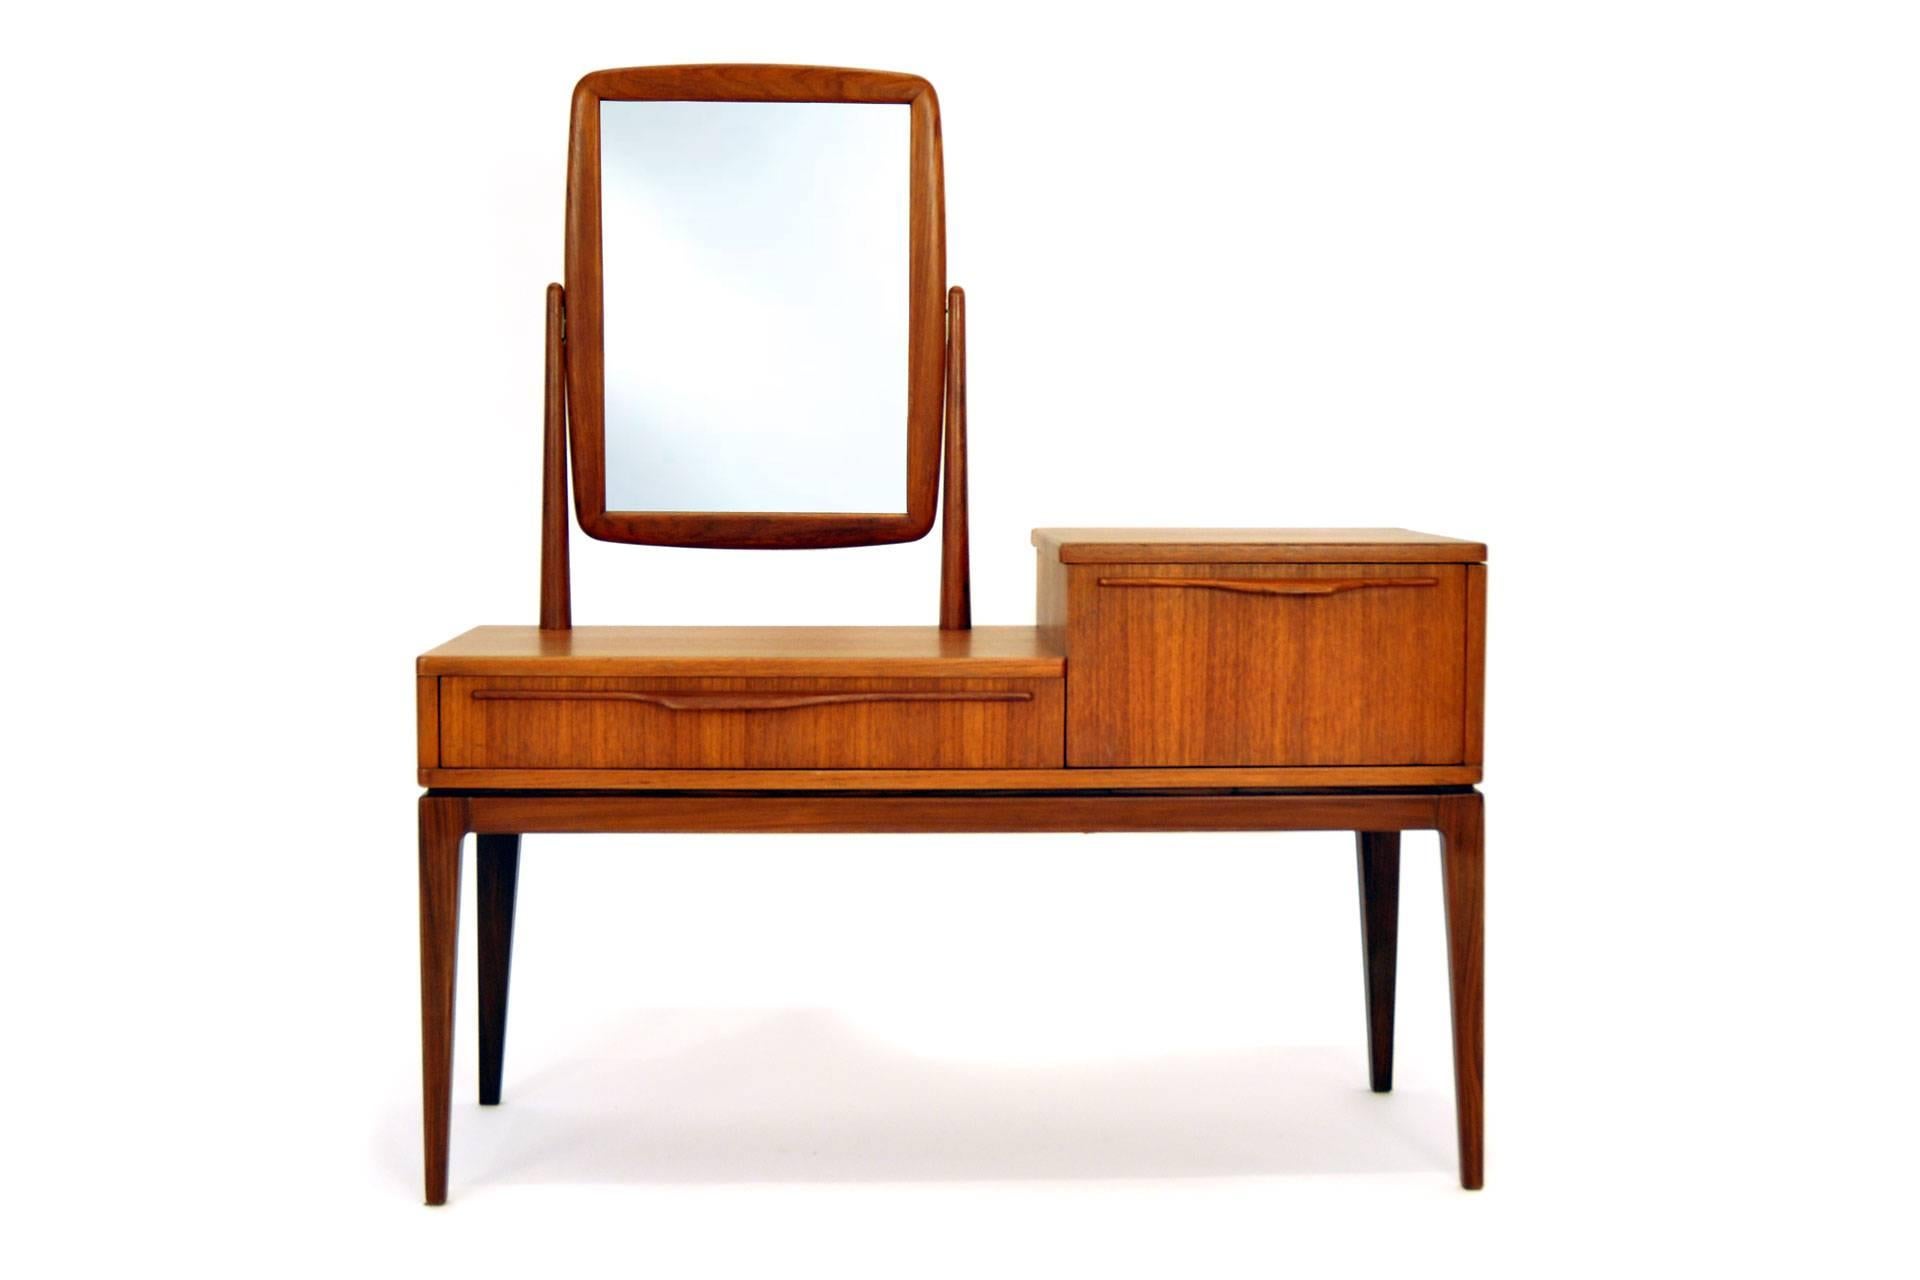 The dressing table was manufactured by Ameublement NF Meuble 212 in France in 1960#s. It is made of teak. The item has one drawer and an case which can be opend and used like storage for cosmetics etc.
 